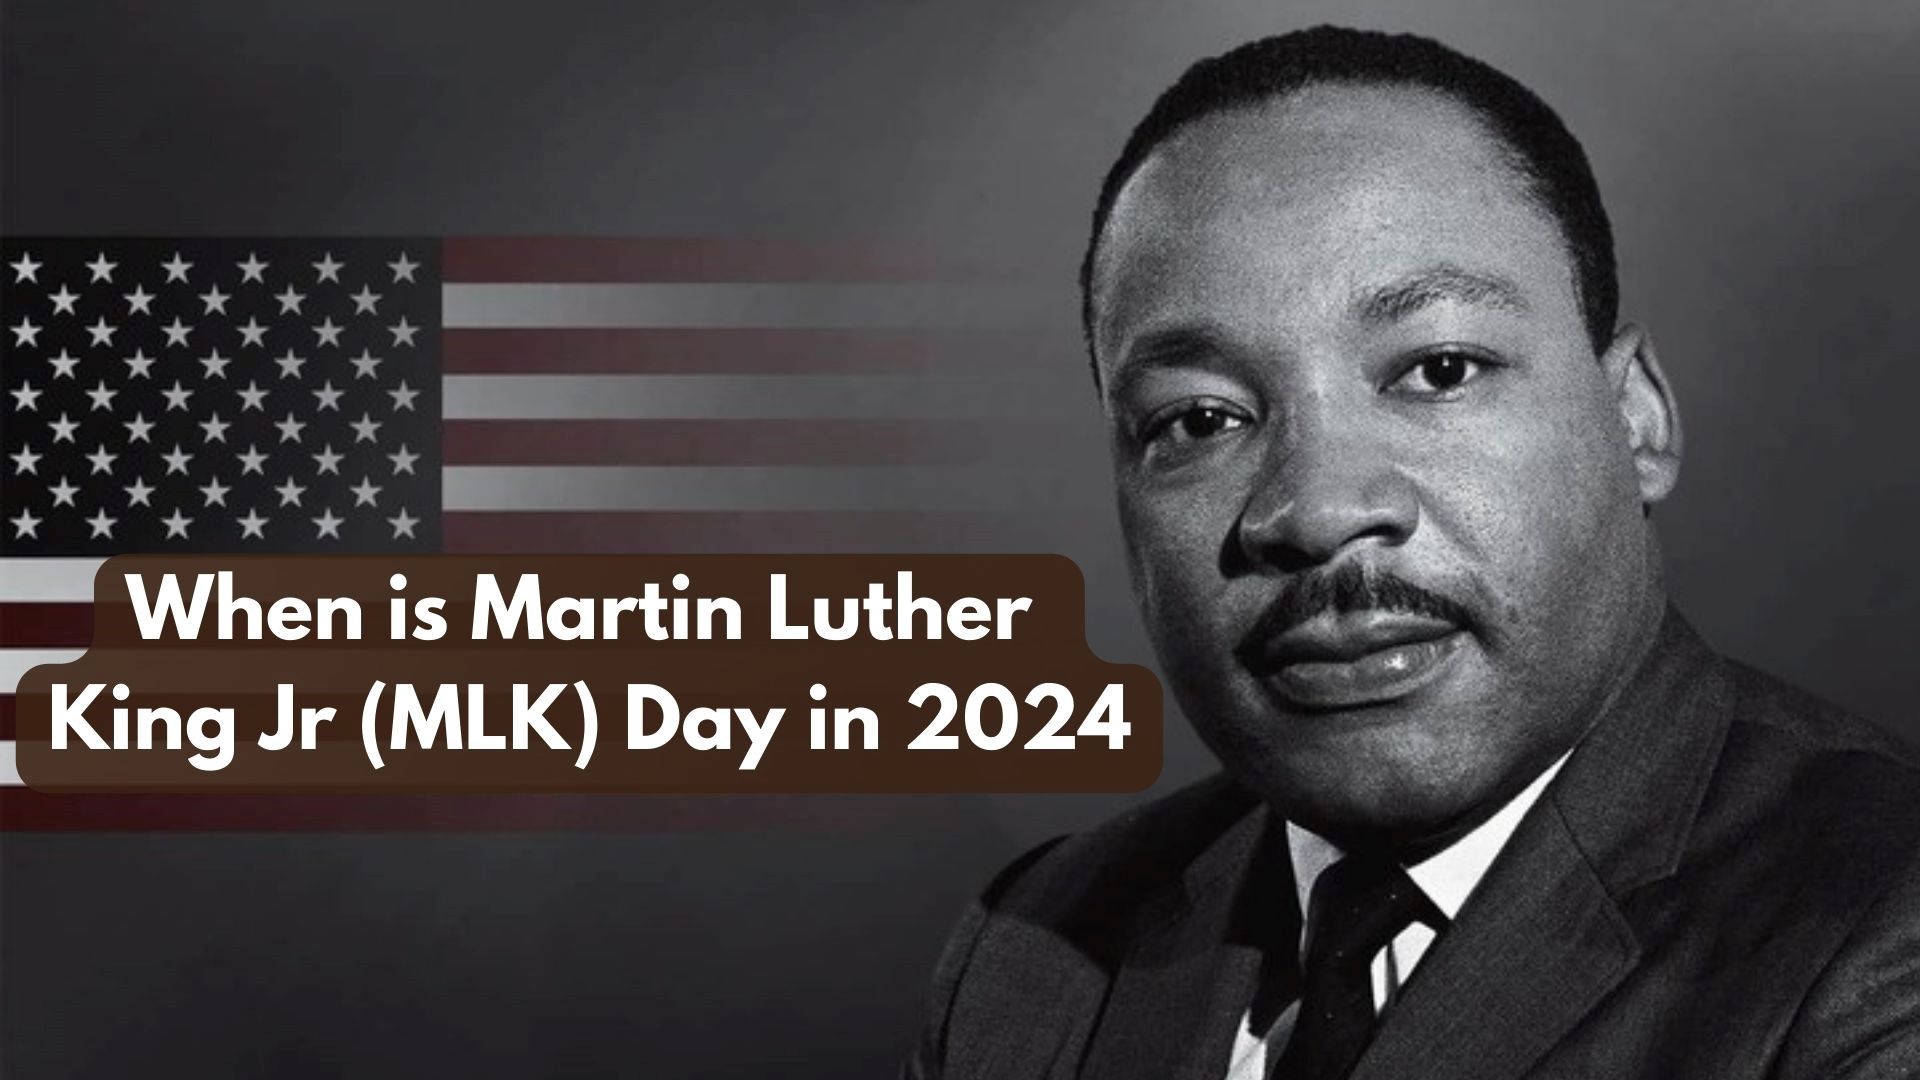 When is Martin Luther King Jr (MLK) Day in 2024?